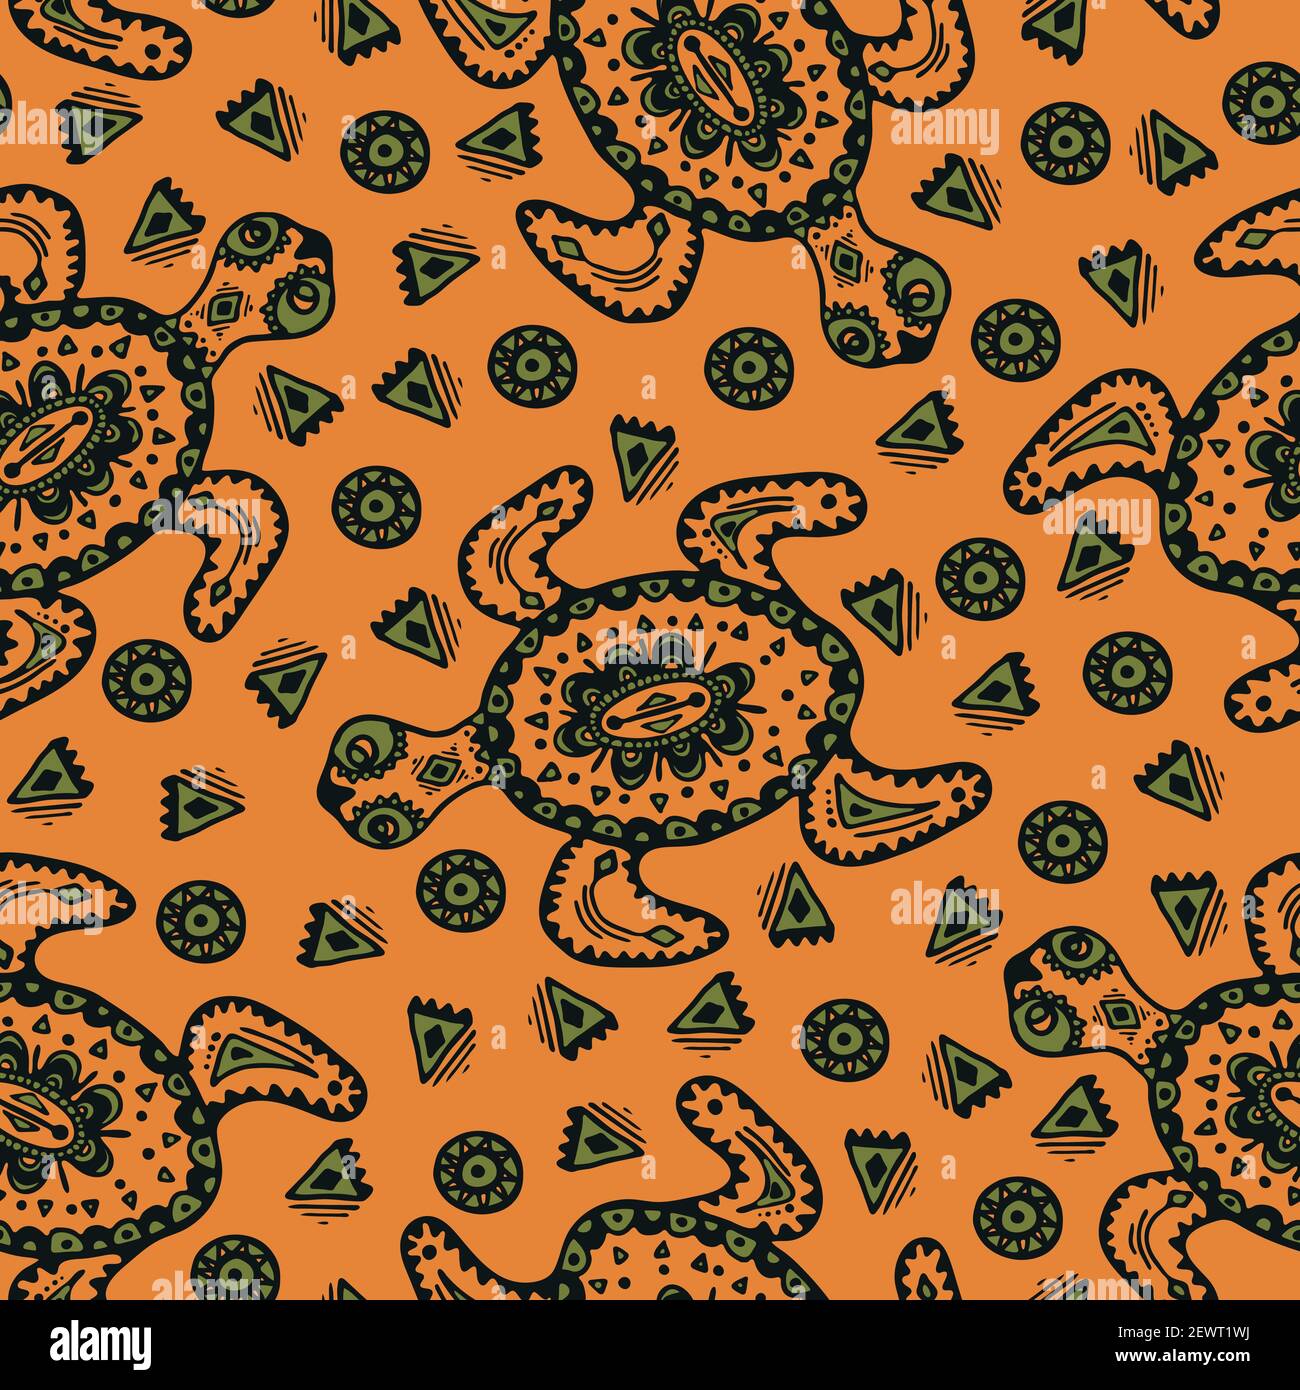 Seamless Vector Pattern With Turtles On Orange Background African Tribal Tortoise Wallpaper Design Ethnic Fashion Textile Stock Vector Image Art Alamy